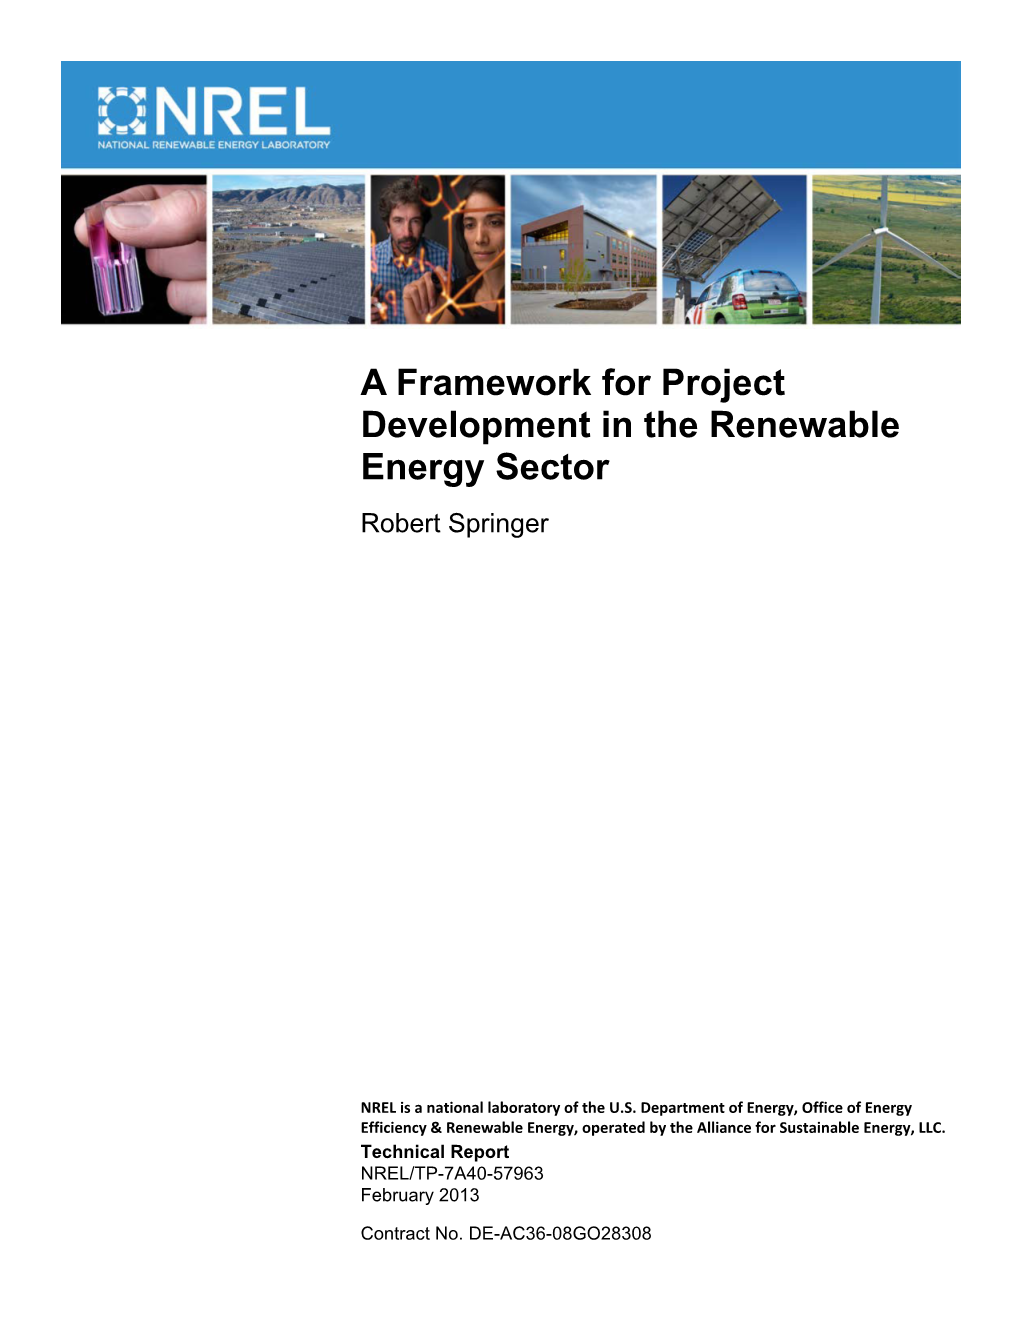 A Framework for Project Development in the Renewable Energy Sector